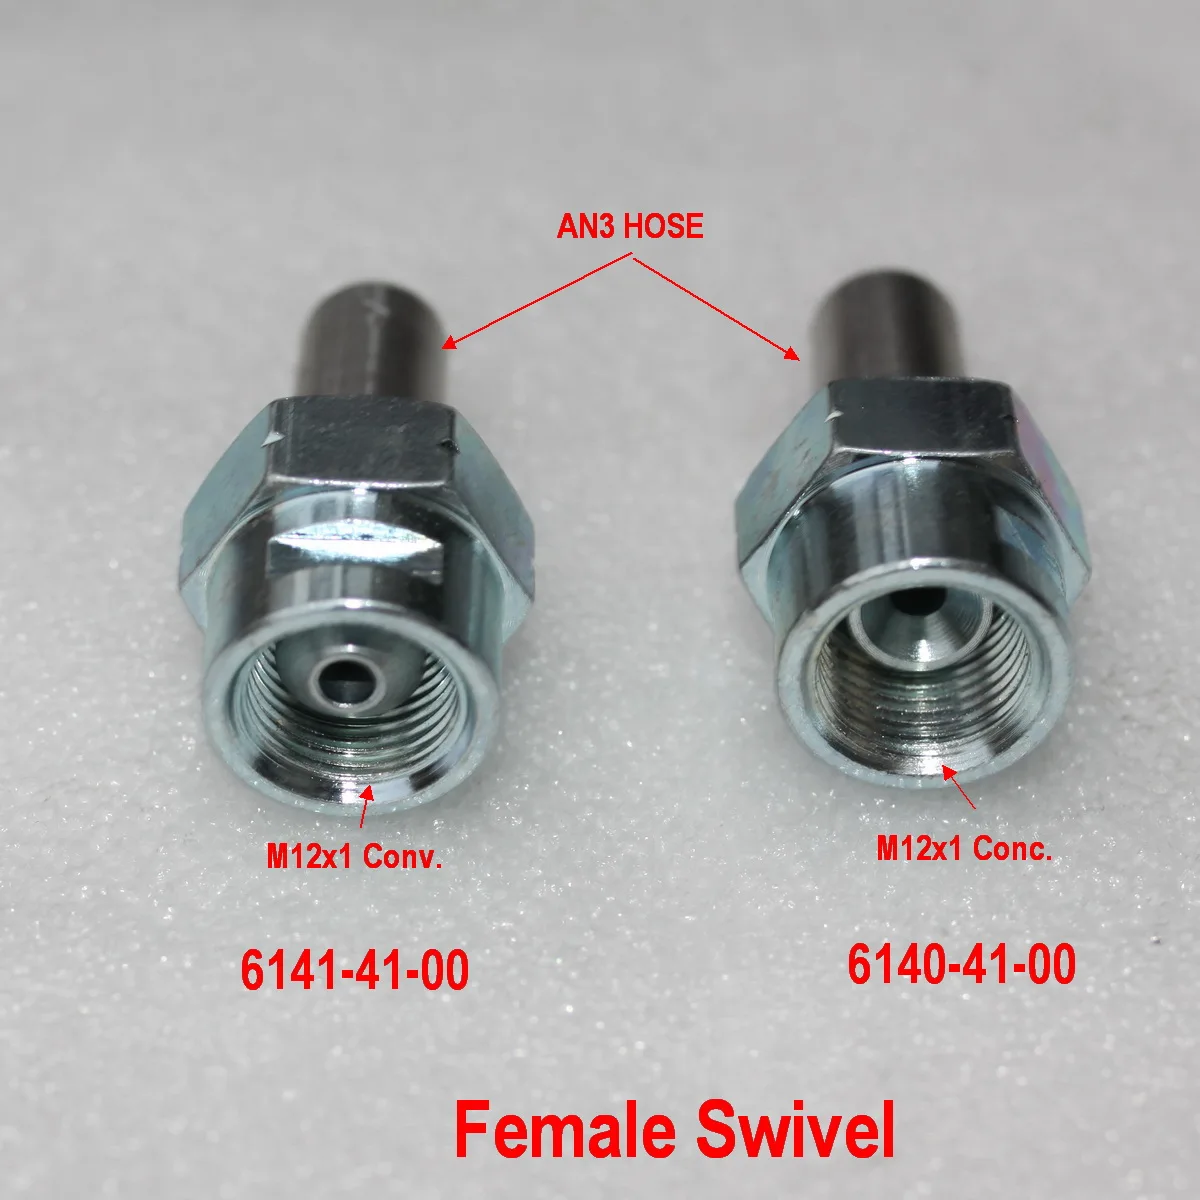 

M12x1 Female CONV. CONC. Swivel Fitting 3-pc For AN3 Braided Hose